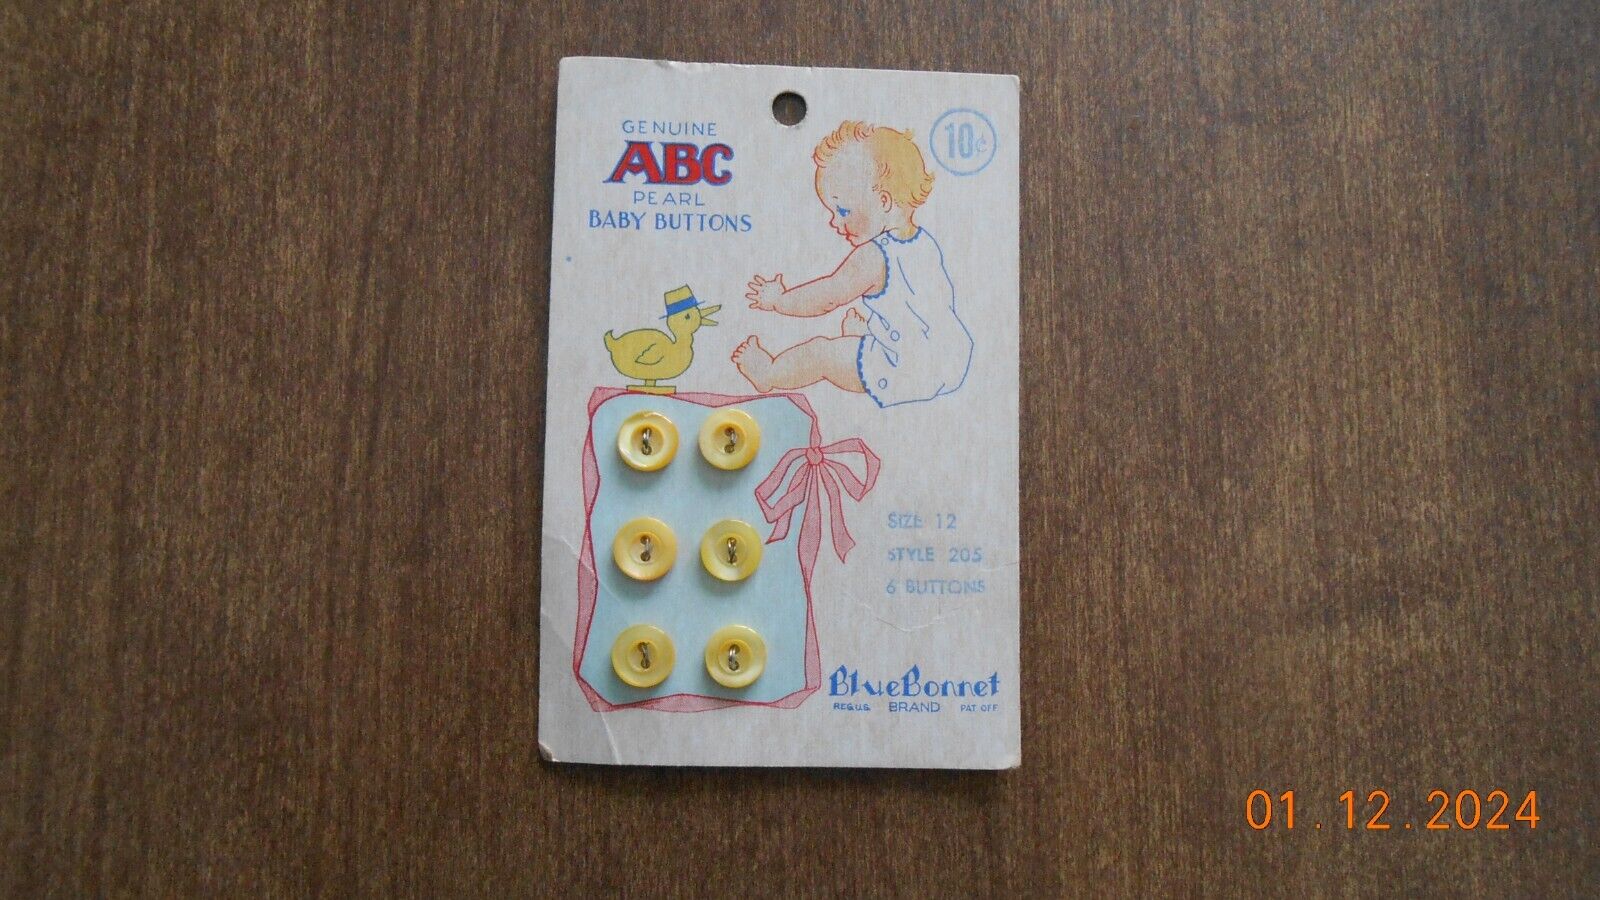 Vintage ABC Yellow Pearl Baby Buttons Style 205 Size 12 Contents 6